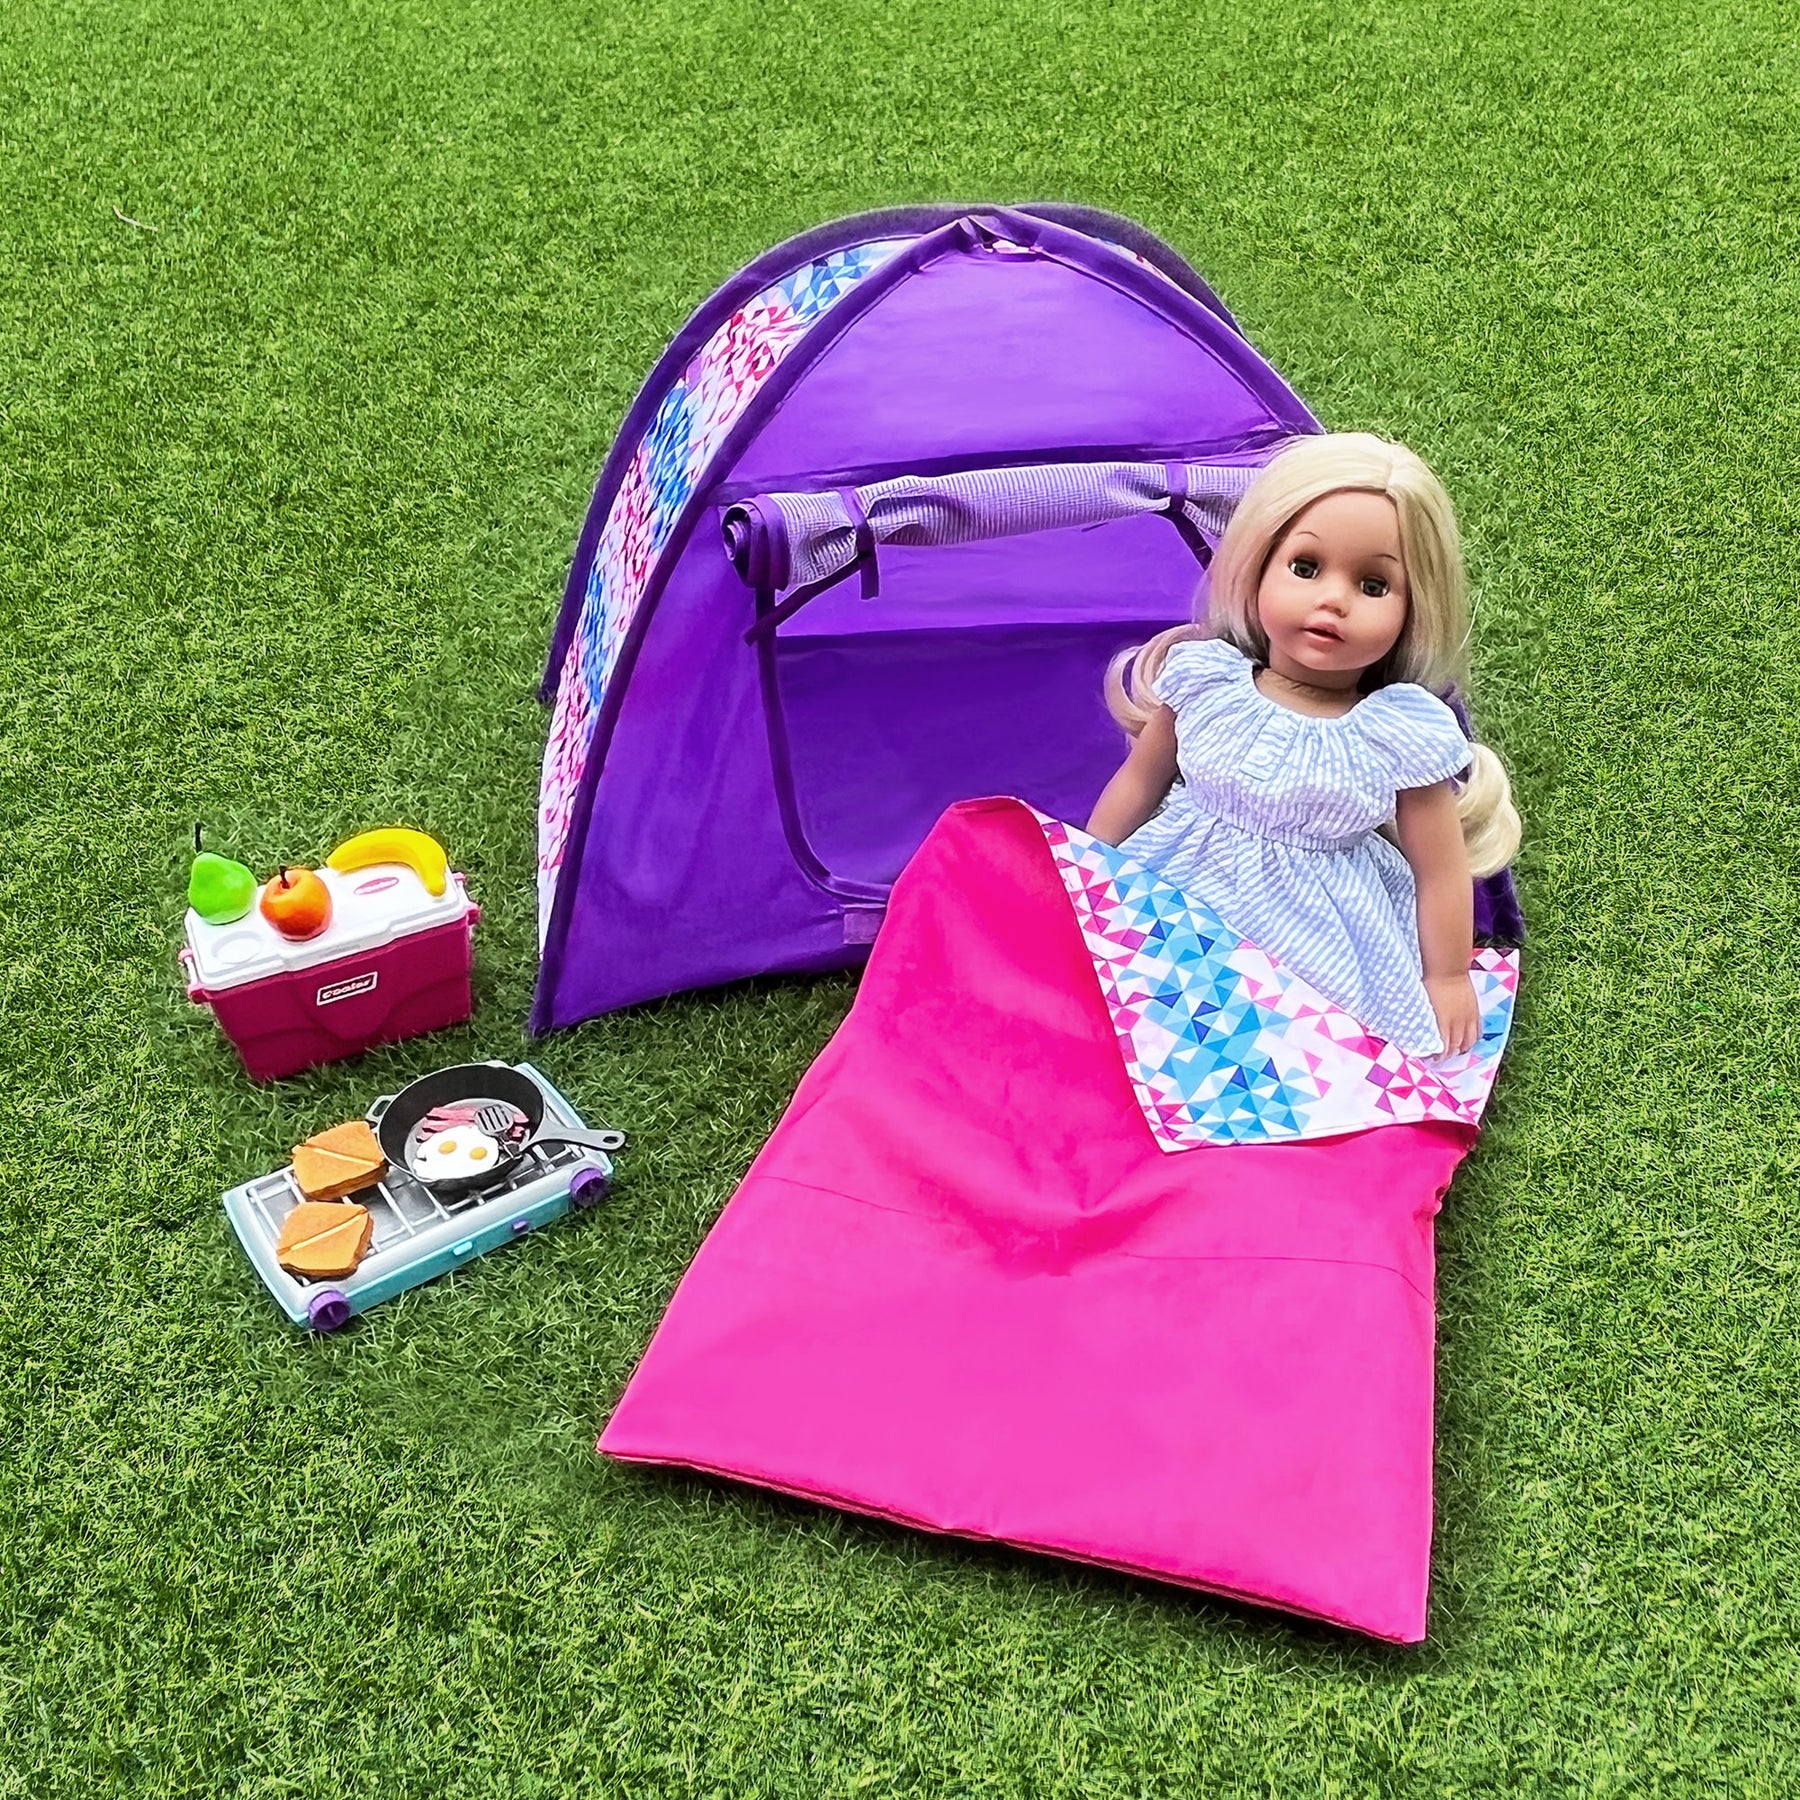 Sophia's by Teamson Kids Camping Tent and Sleeping Bag Set for 18 Dol